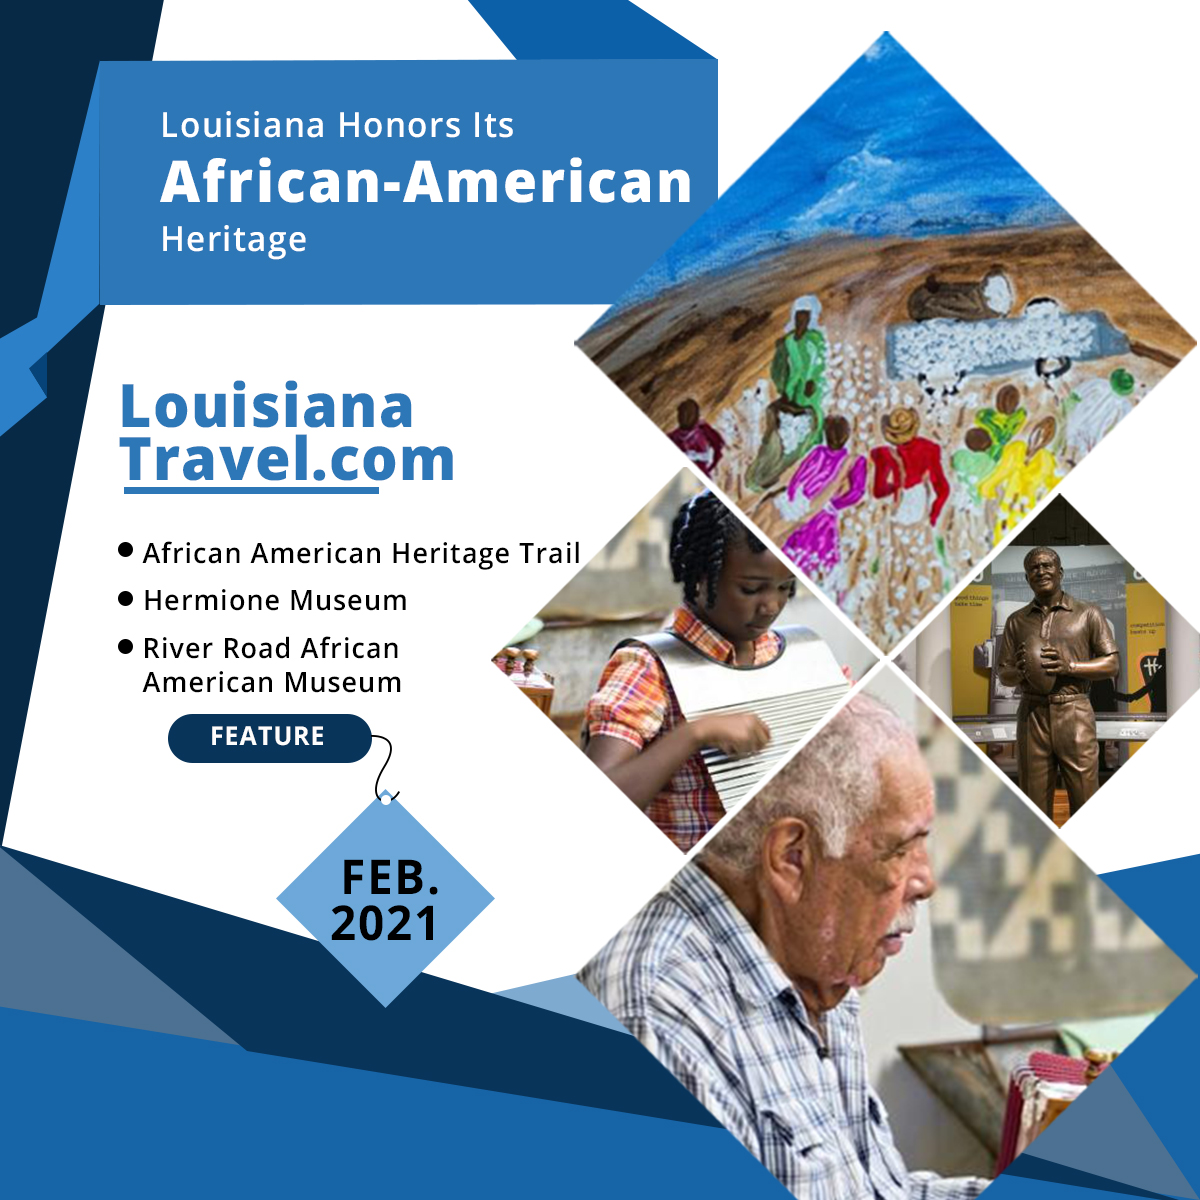 Louisiana Honors Its African-American Heritage